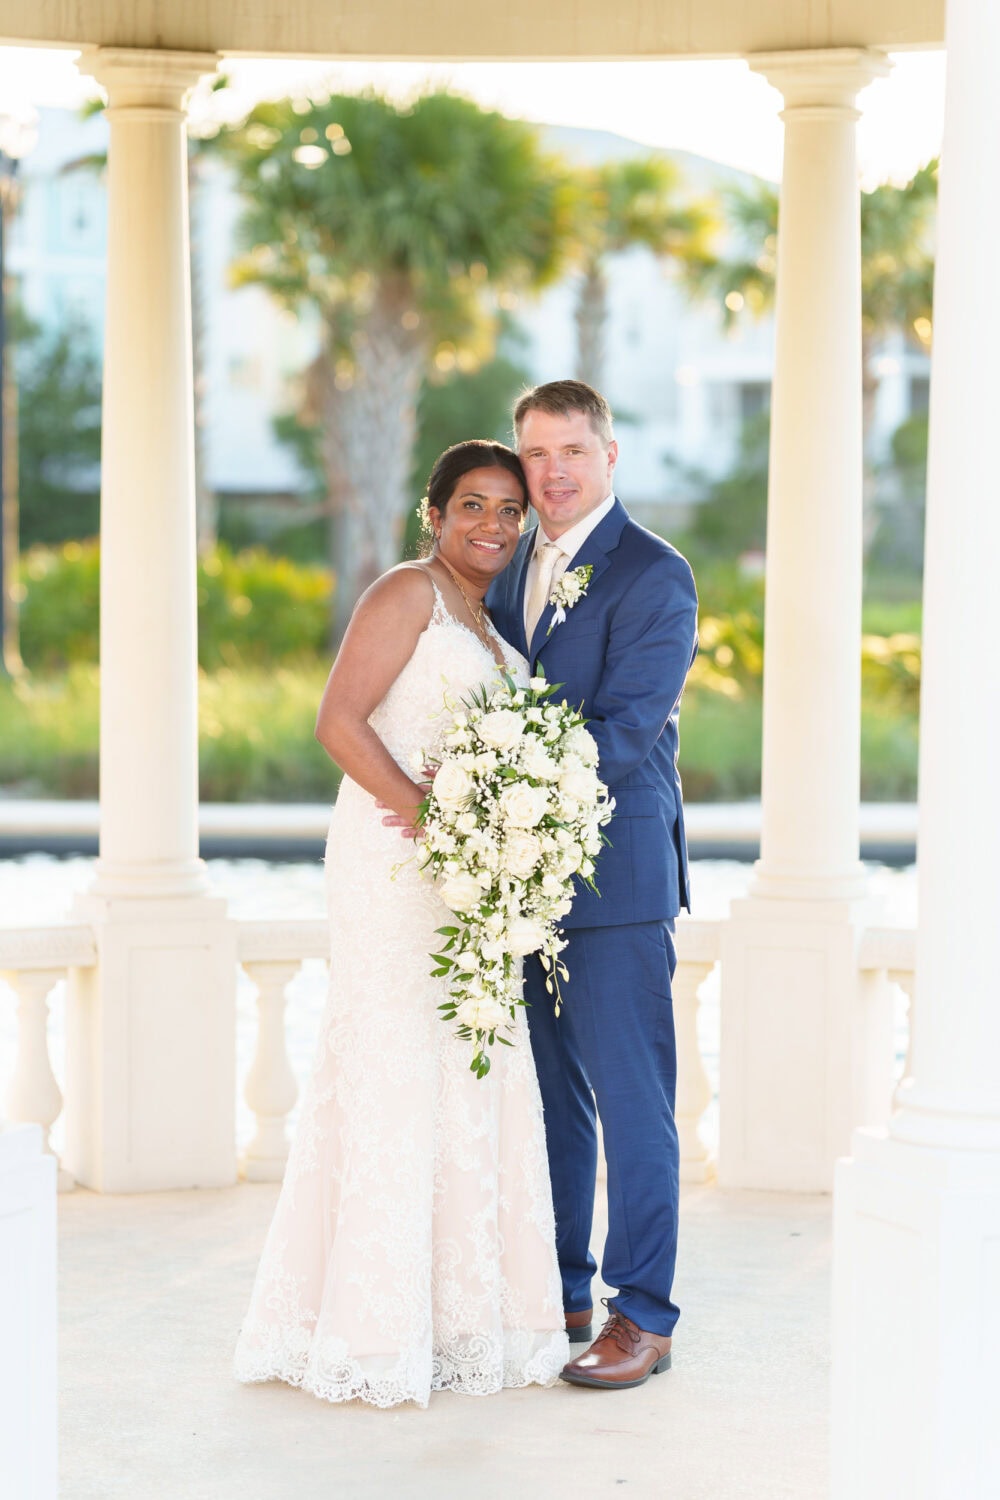 Portraits of the bride and groom under the gazebo - 21 Main Events